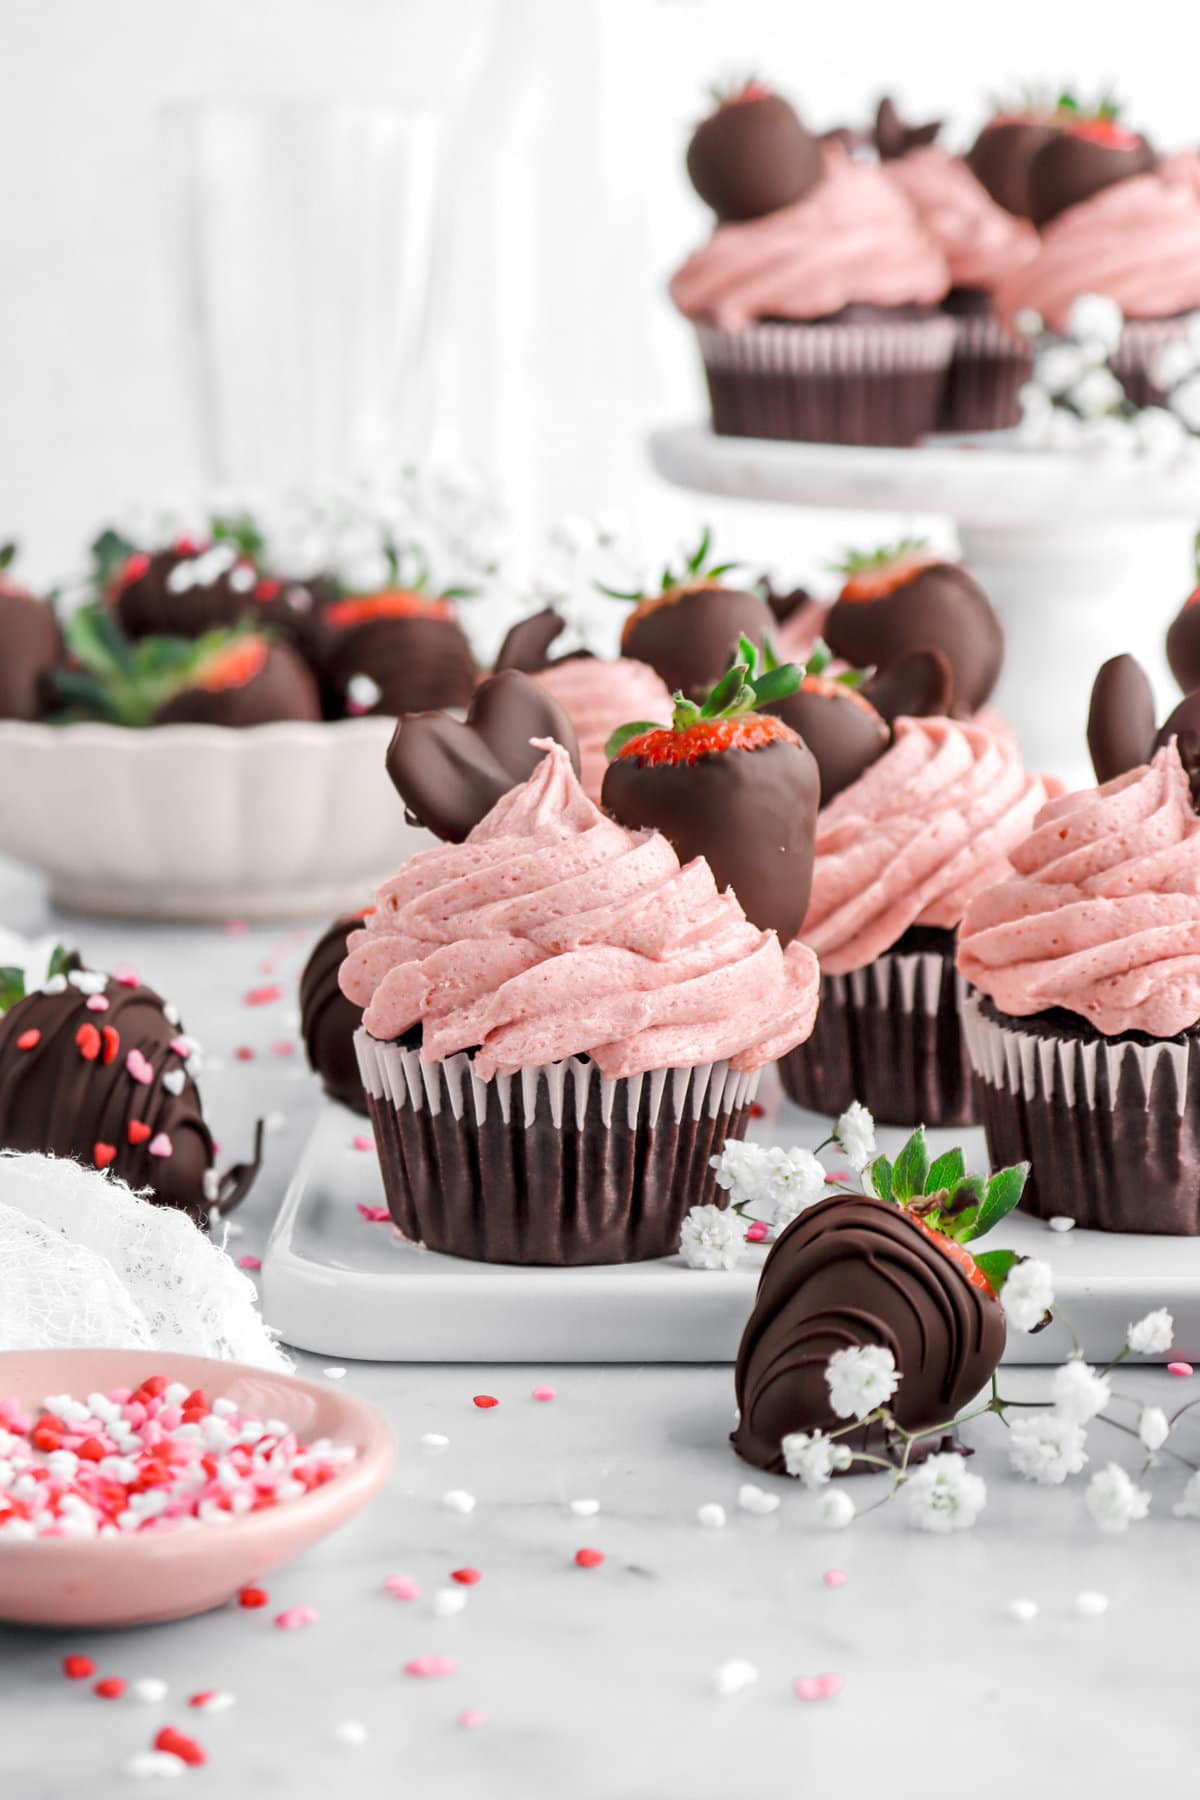 front image of chocolate covered strawberry cupcake with more cupcakes behind, as well as chocolate covered strawberries and mini heart sprinkles around.